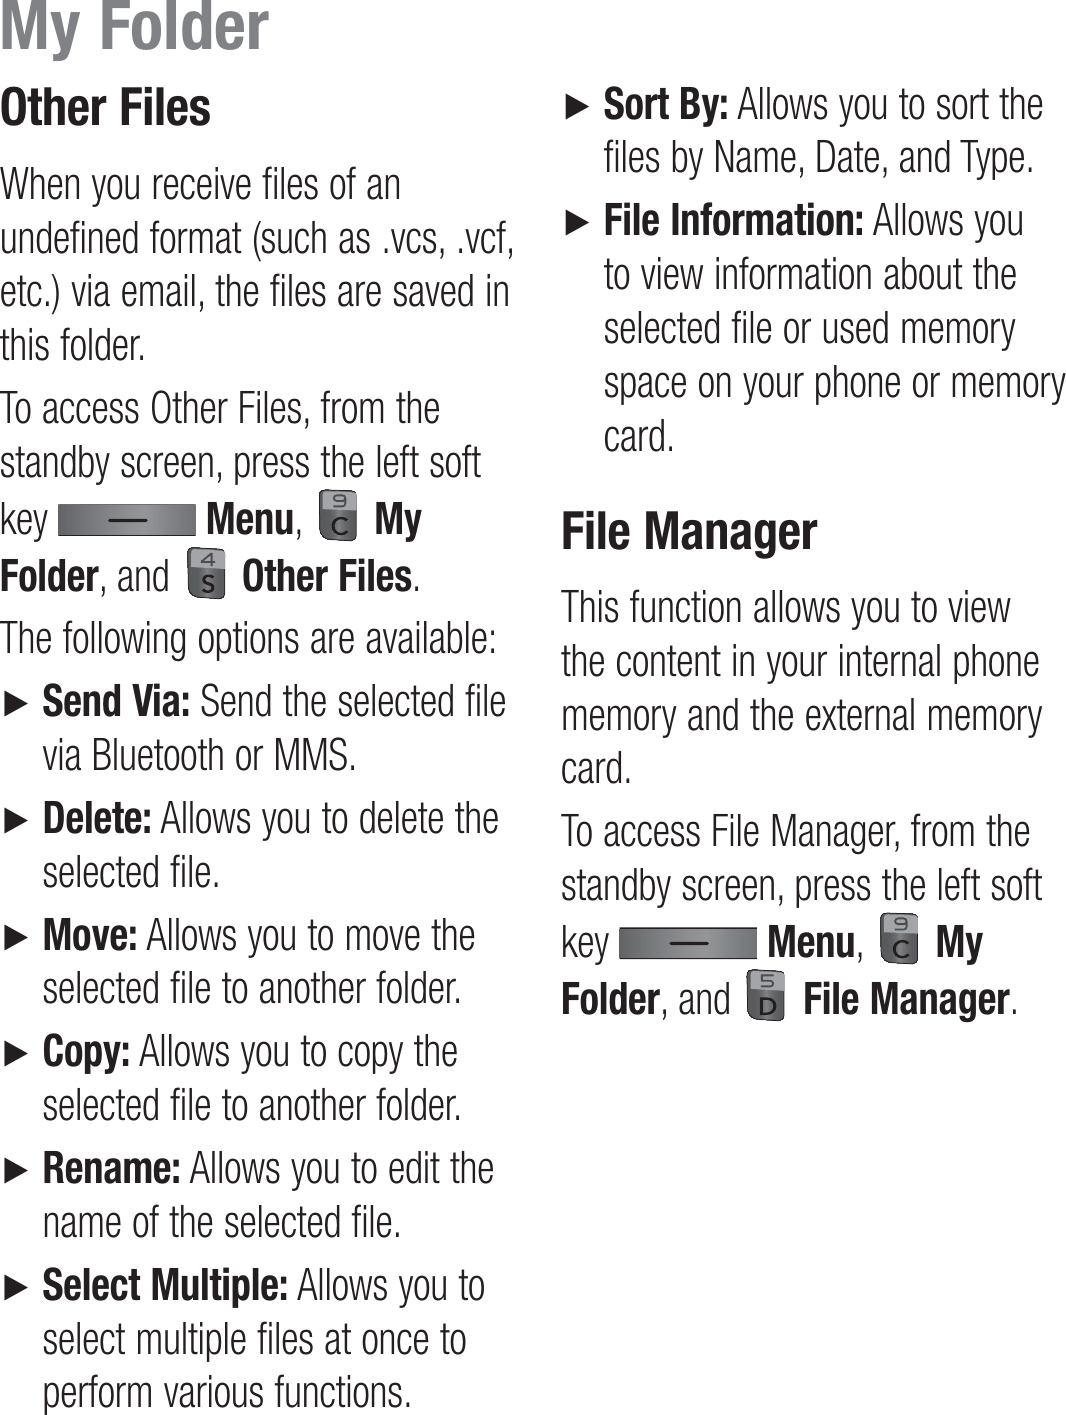 Other FilesWhen you receive files of an undefined format (such as .vcs, .vcf, etc.) via email, the files are saved in this folder.To access Other Files, from the standby screen, press the left soft key   Menu,   My Folder, and   Other Files.The following options are available:►   Send Via: Send the selected file via Bluetooth or MMS.►   Delete: Allows you to delete the selected file. ►   Move: Allows you to move the selected file to another folder.►   Copy: Allows you to copy the selected file to another folder.►   Rename: Allows you to edit the name of the selected file.►   Select Multiple: Allows you to select multiple files at once to perform various functions.►   Sort By: Allows you to sort the files by Name, Date, and Type.►   File Information: Allows you to view information about the selected file or used memory space on your phone or memory card.File ManagerThis function allows you to view the content in your internal phone memory and the external memory card.To access File Manager, from the standby screen, press the left soft key   Menu,   My Folder, and   File Manager.My Folder